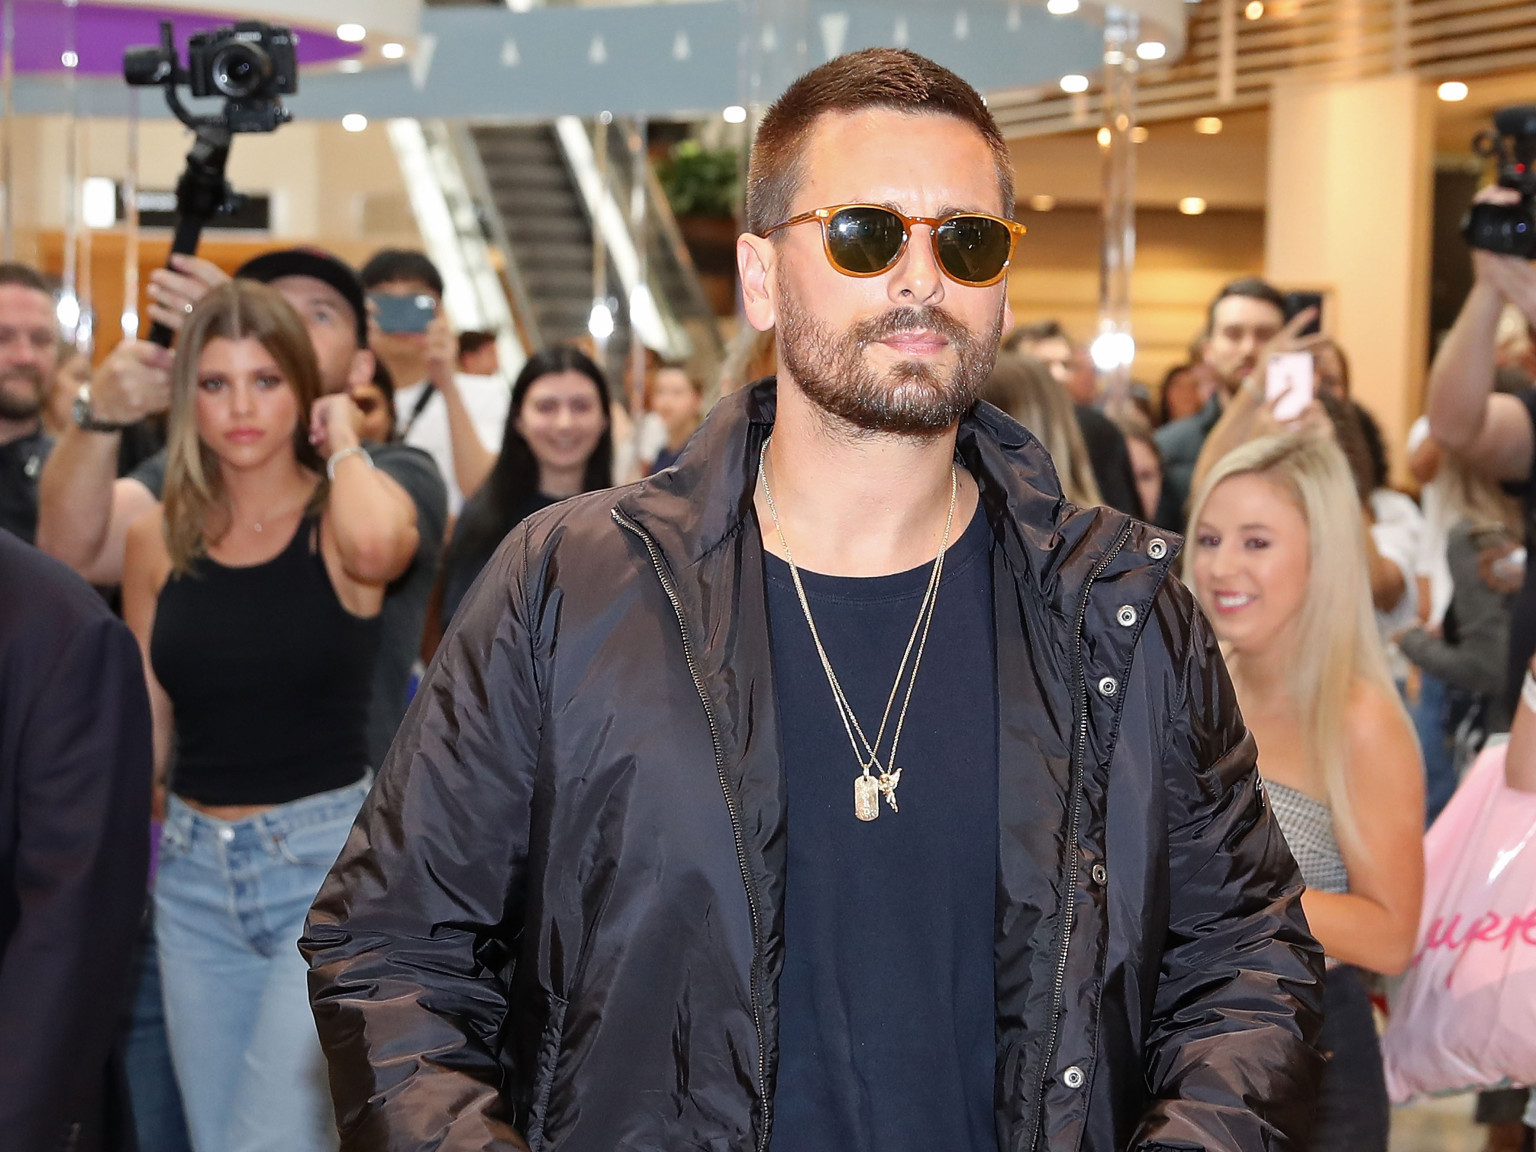 Scott Disick is no stranger to being in the limelight. Why is everyone upset about his new girlfriend's age?